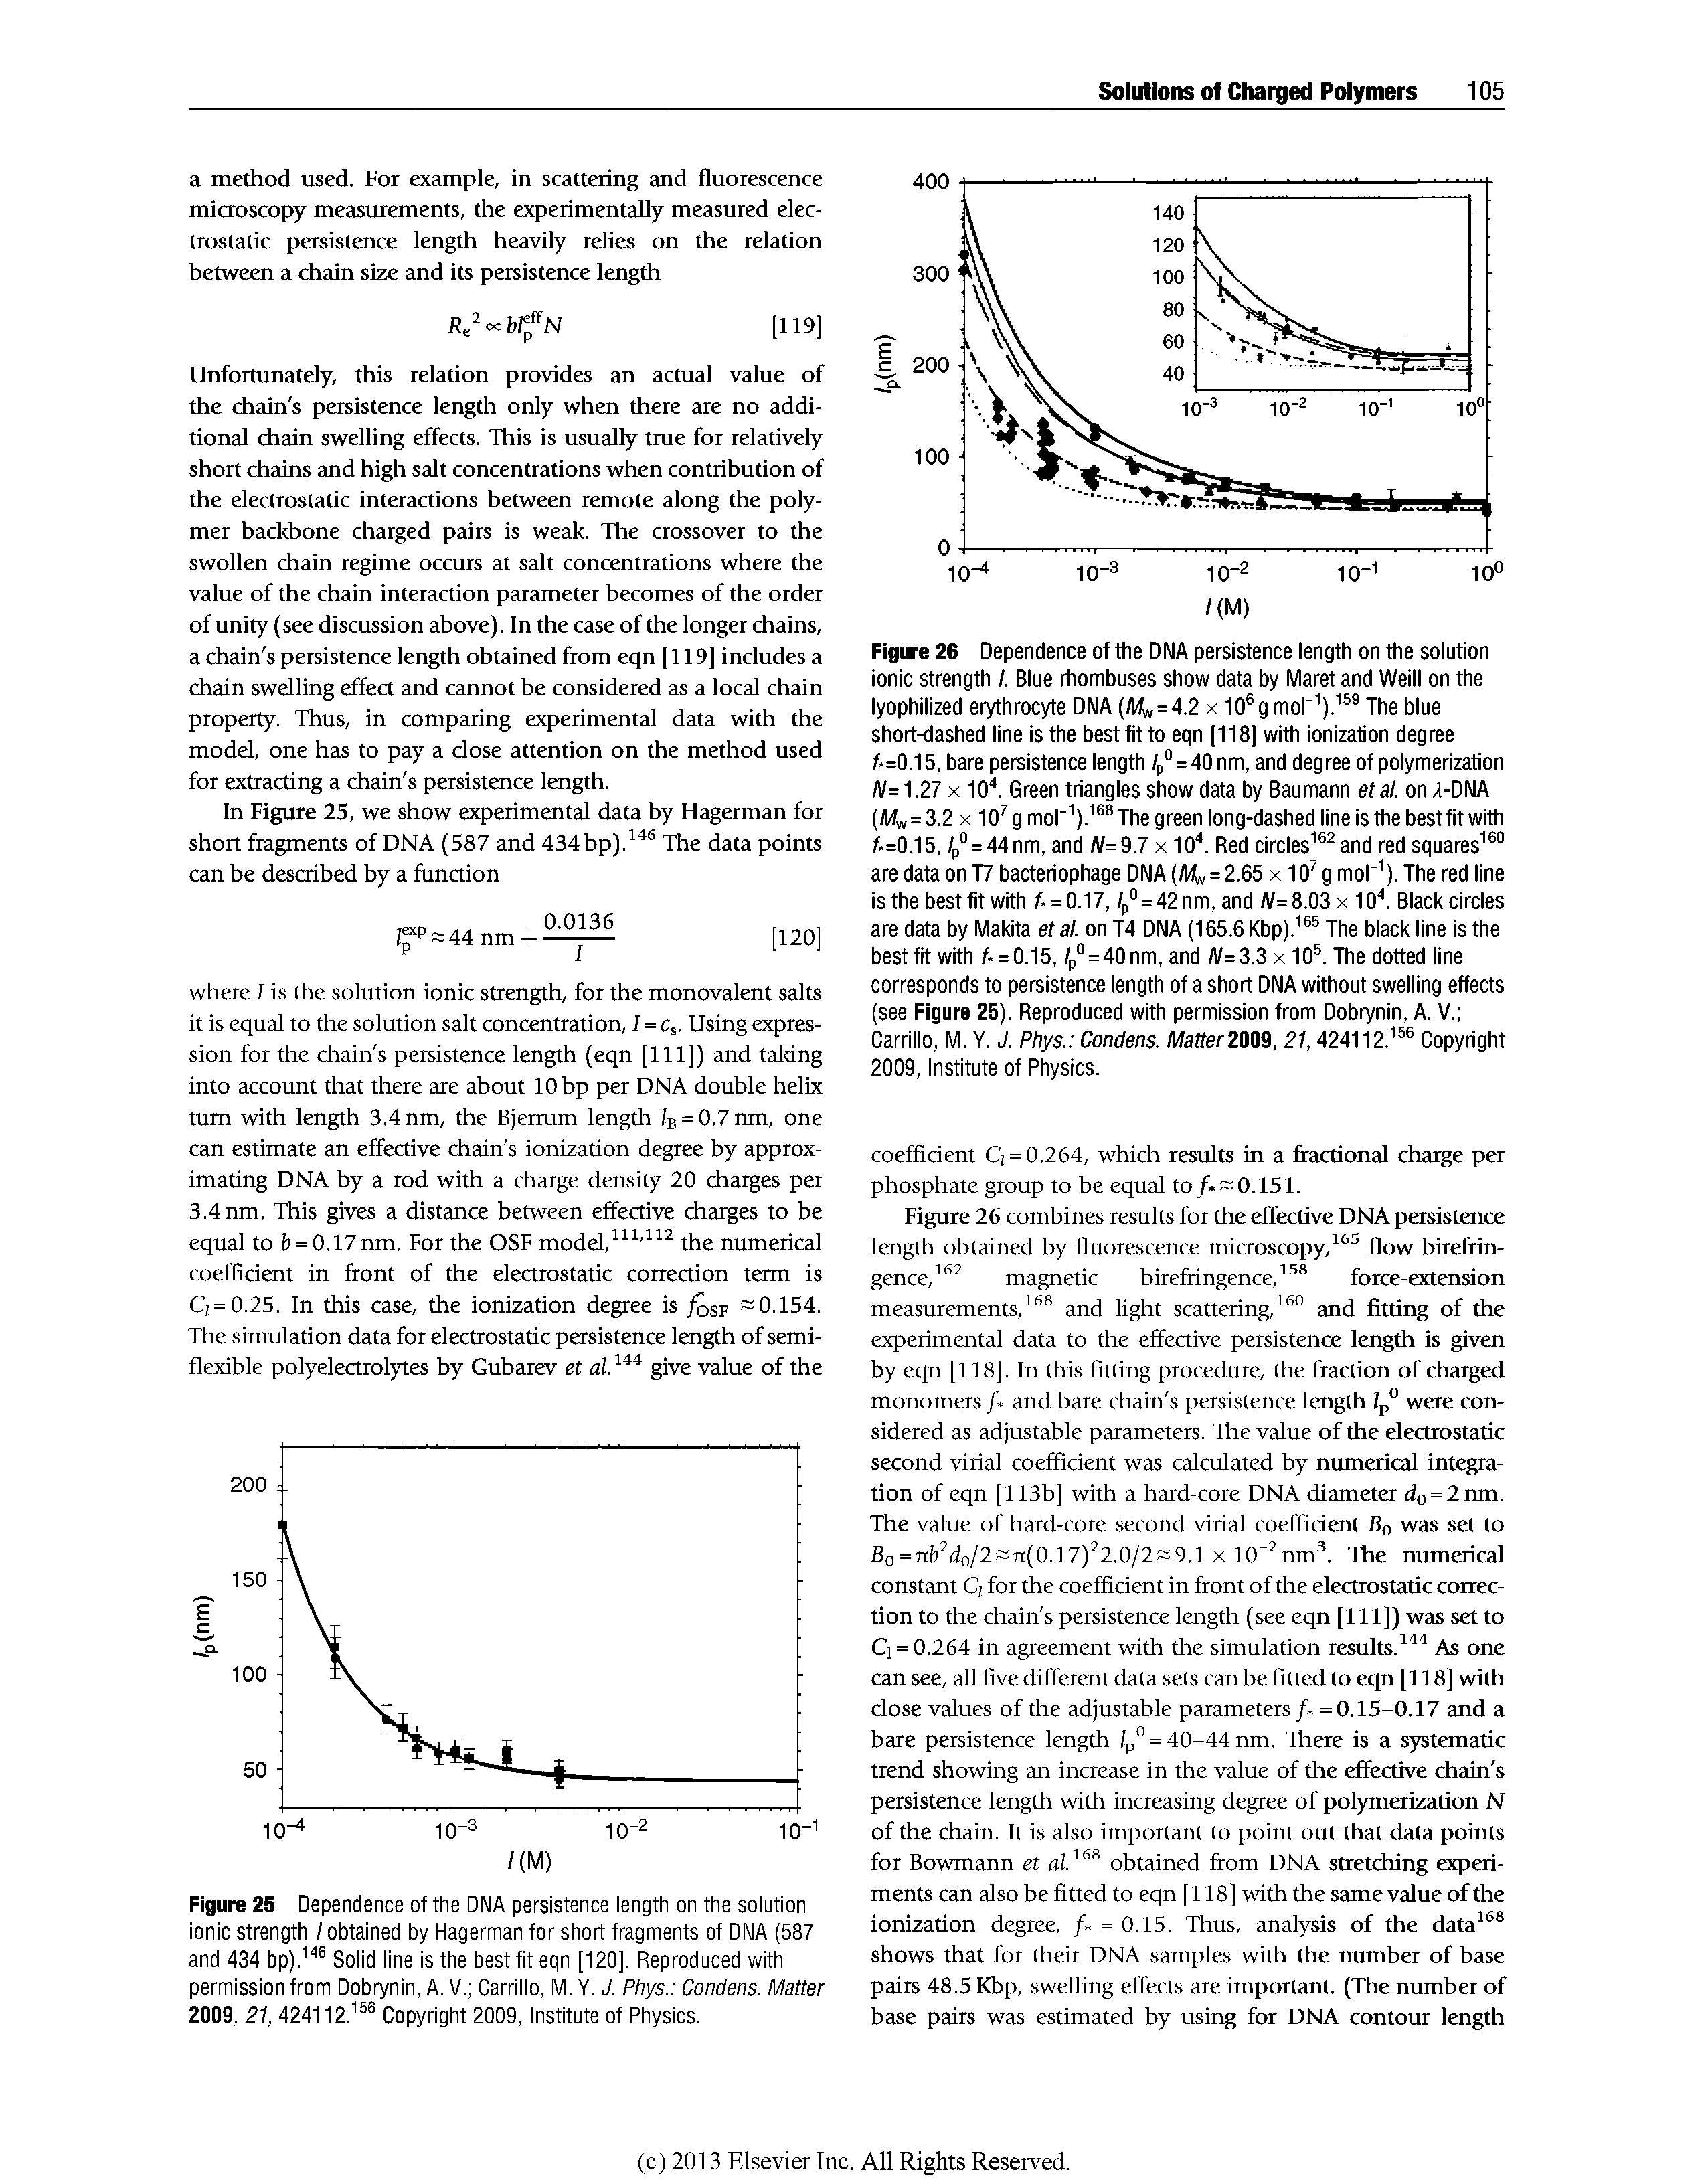 Figure 25 Dependence of the DNA persistence length on the solution ionic strength / obtained by Hagerman for short fragments of DNA (587 and 434 bp). Solid line is the best fit eqn [120], Reproduced with permission from Dobrynin, A. V. Carrillo, M. Y. J. Phys. Condens. Matter 2009, 21, 424112. Copyright 2009, Institute of Physics.